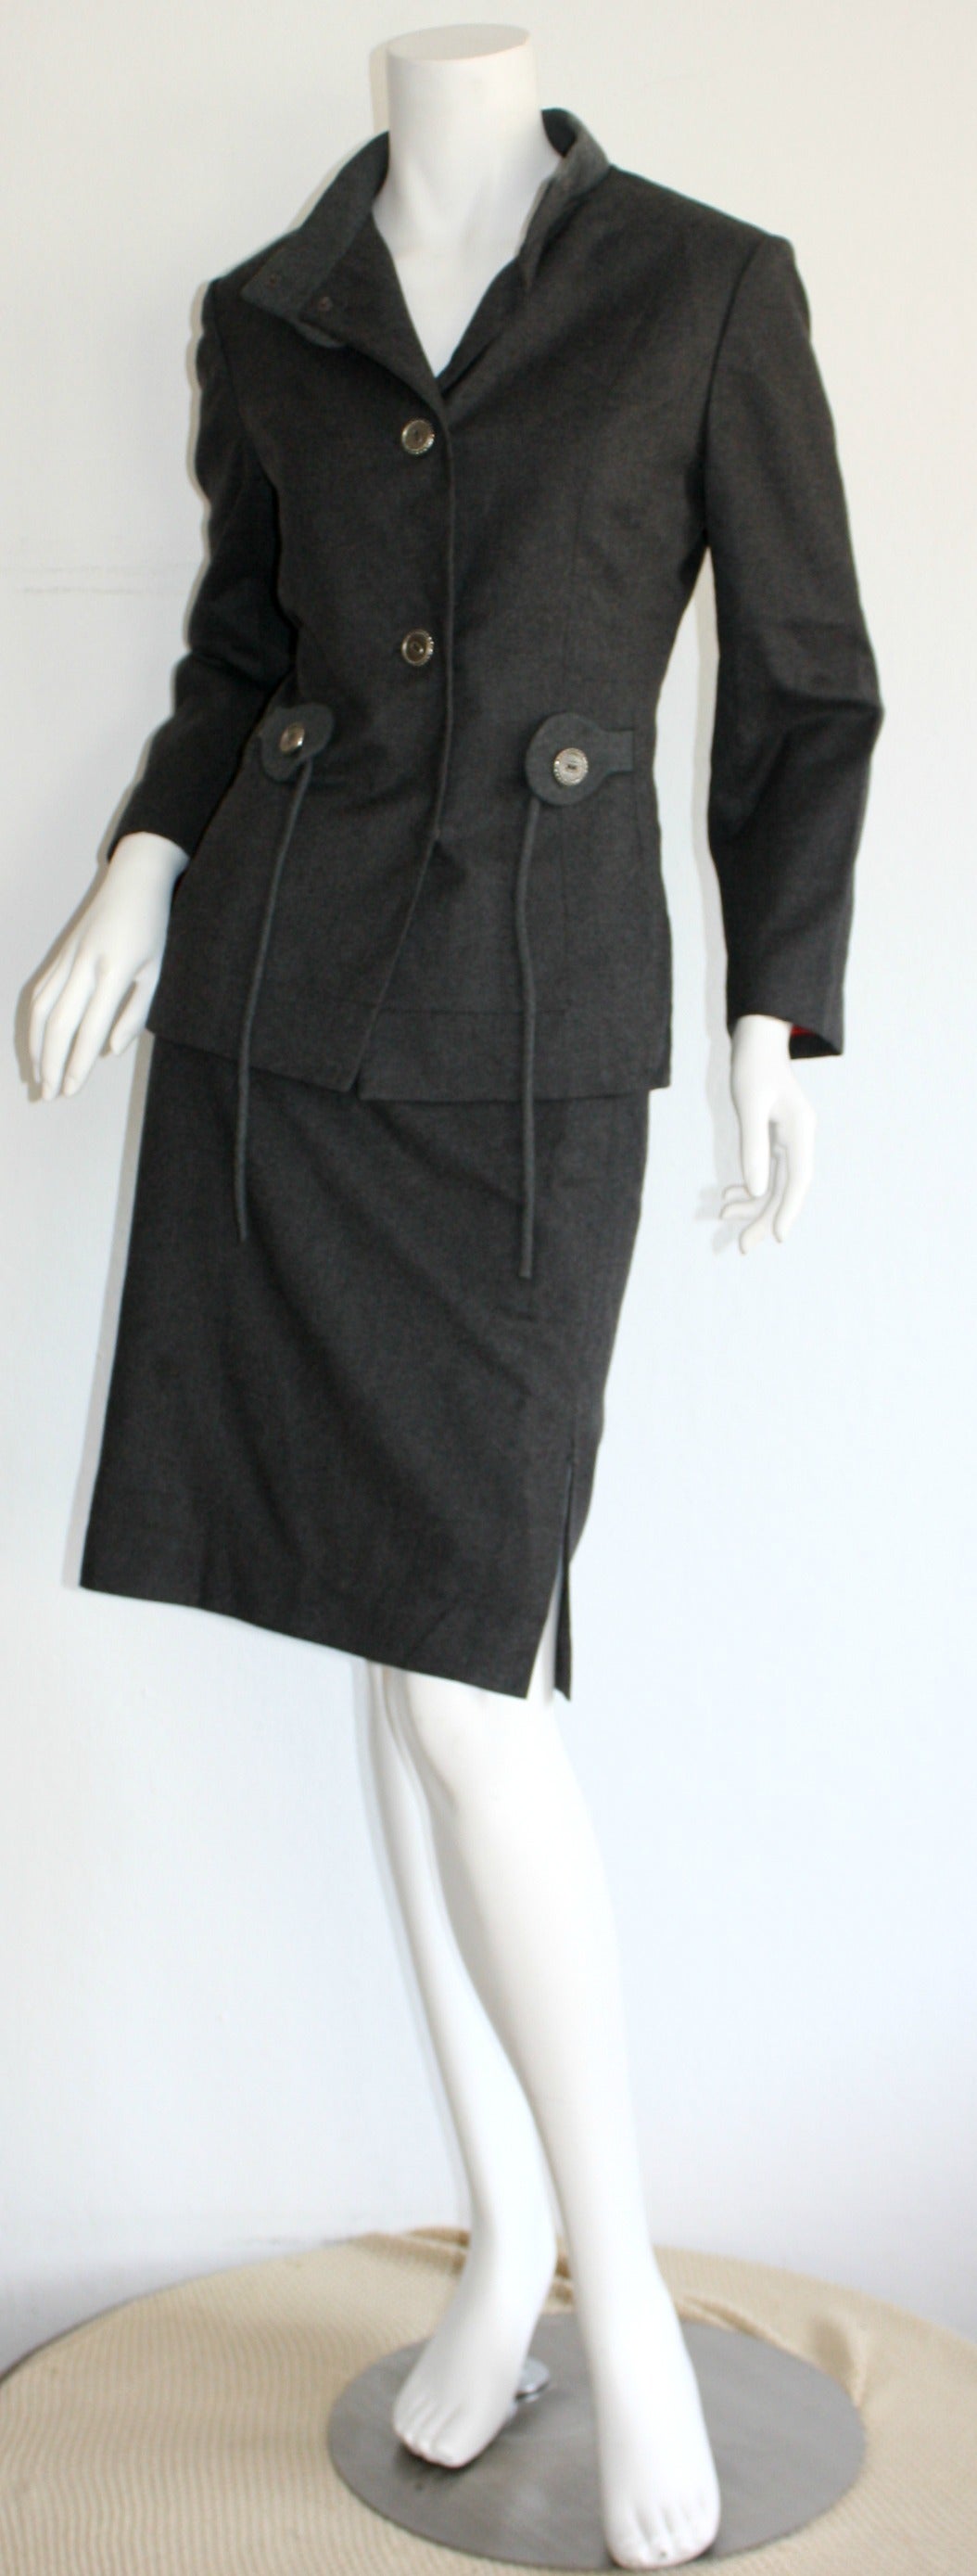 Striking vintage 1940s Don Loper of Beverly Hills skirt suit. Features silver buttons up the bodice, and inner snaps at collar. Matching wool ribbon attached at the waist to tie into a bow, or leave down. High-waisted pencil skirt. Incredible fit,